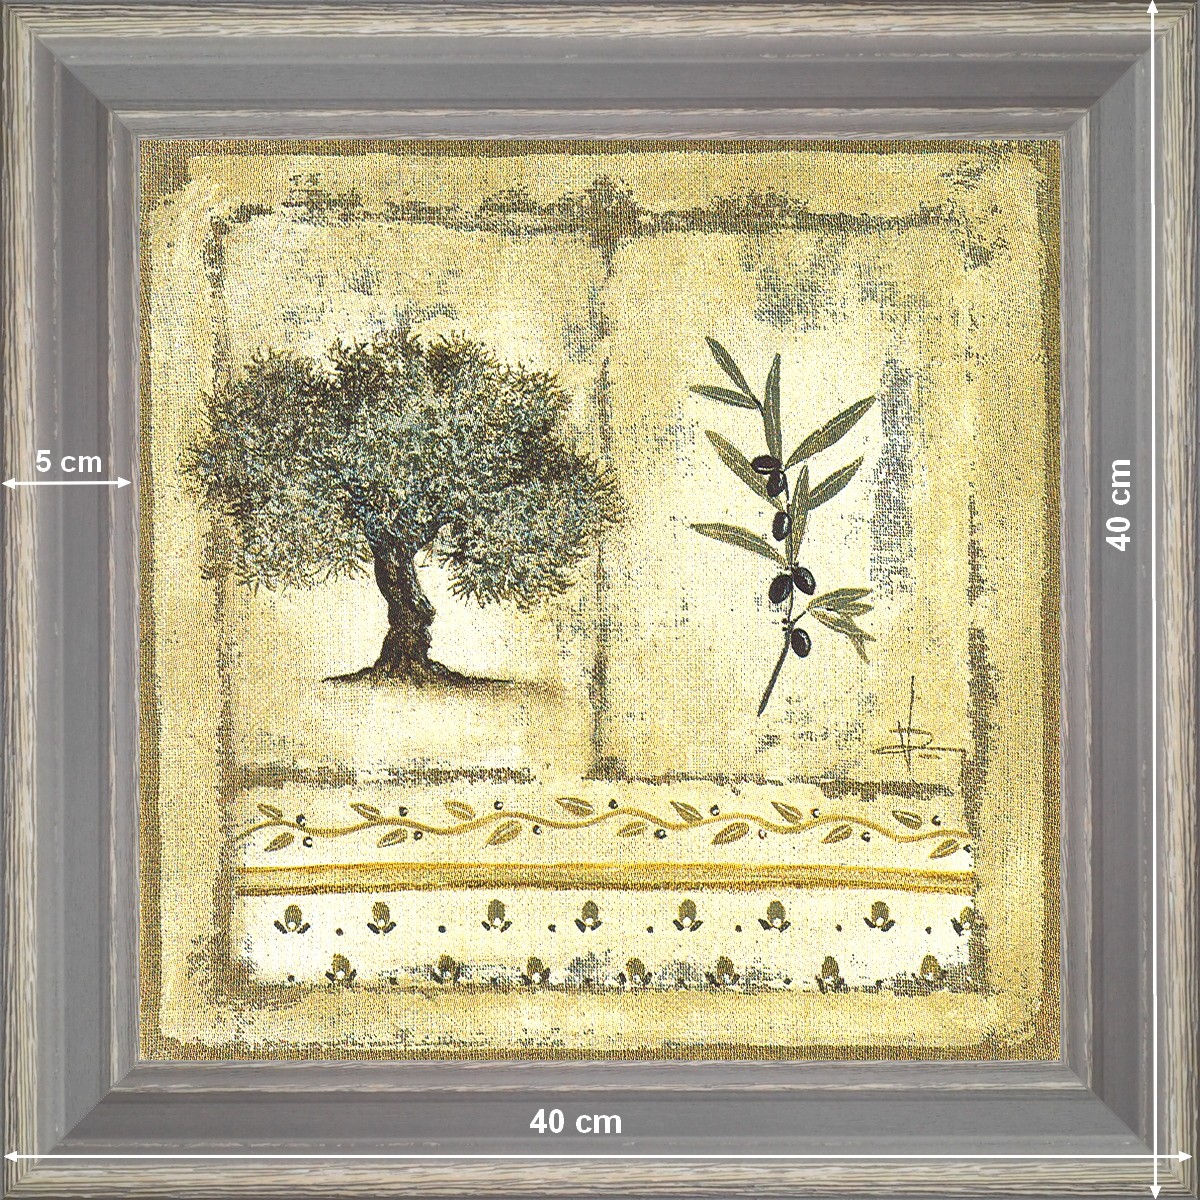 Olive-tree and branch 1 - dimension 40 x 40 cm - Grey